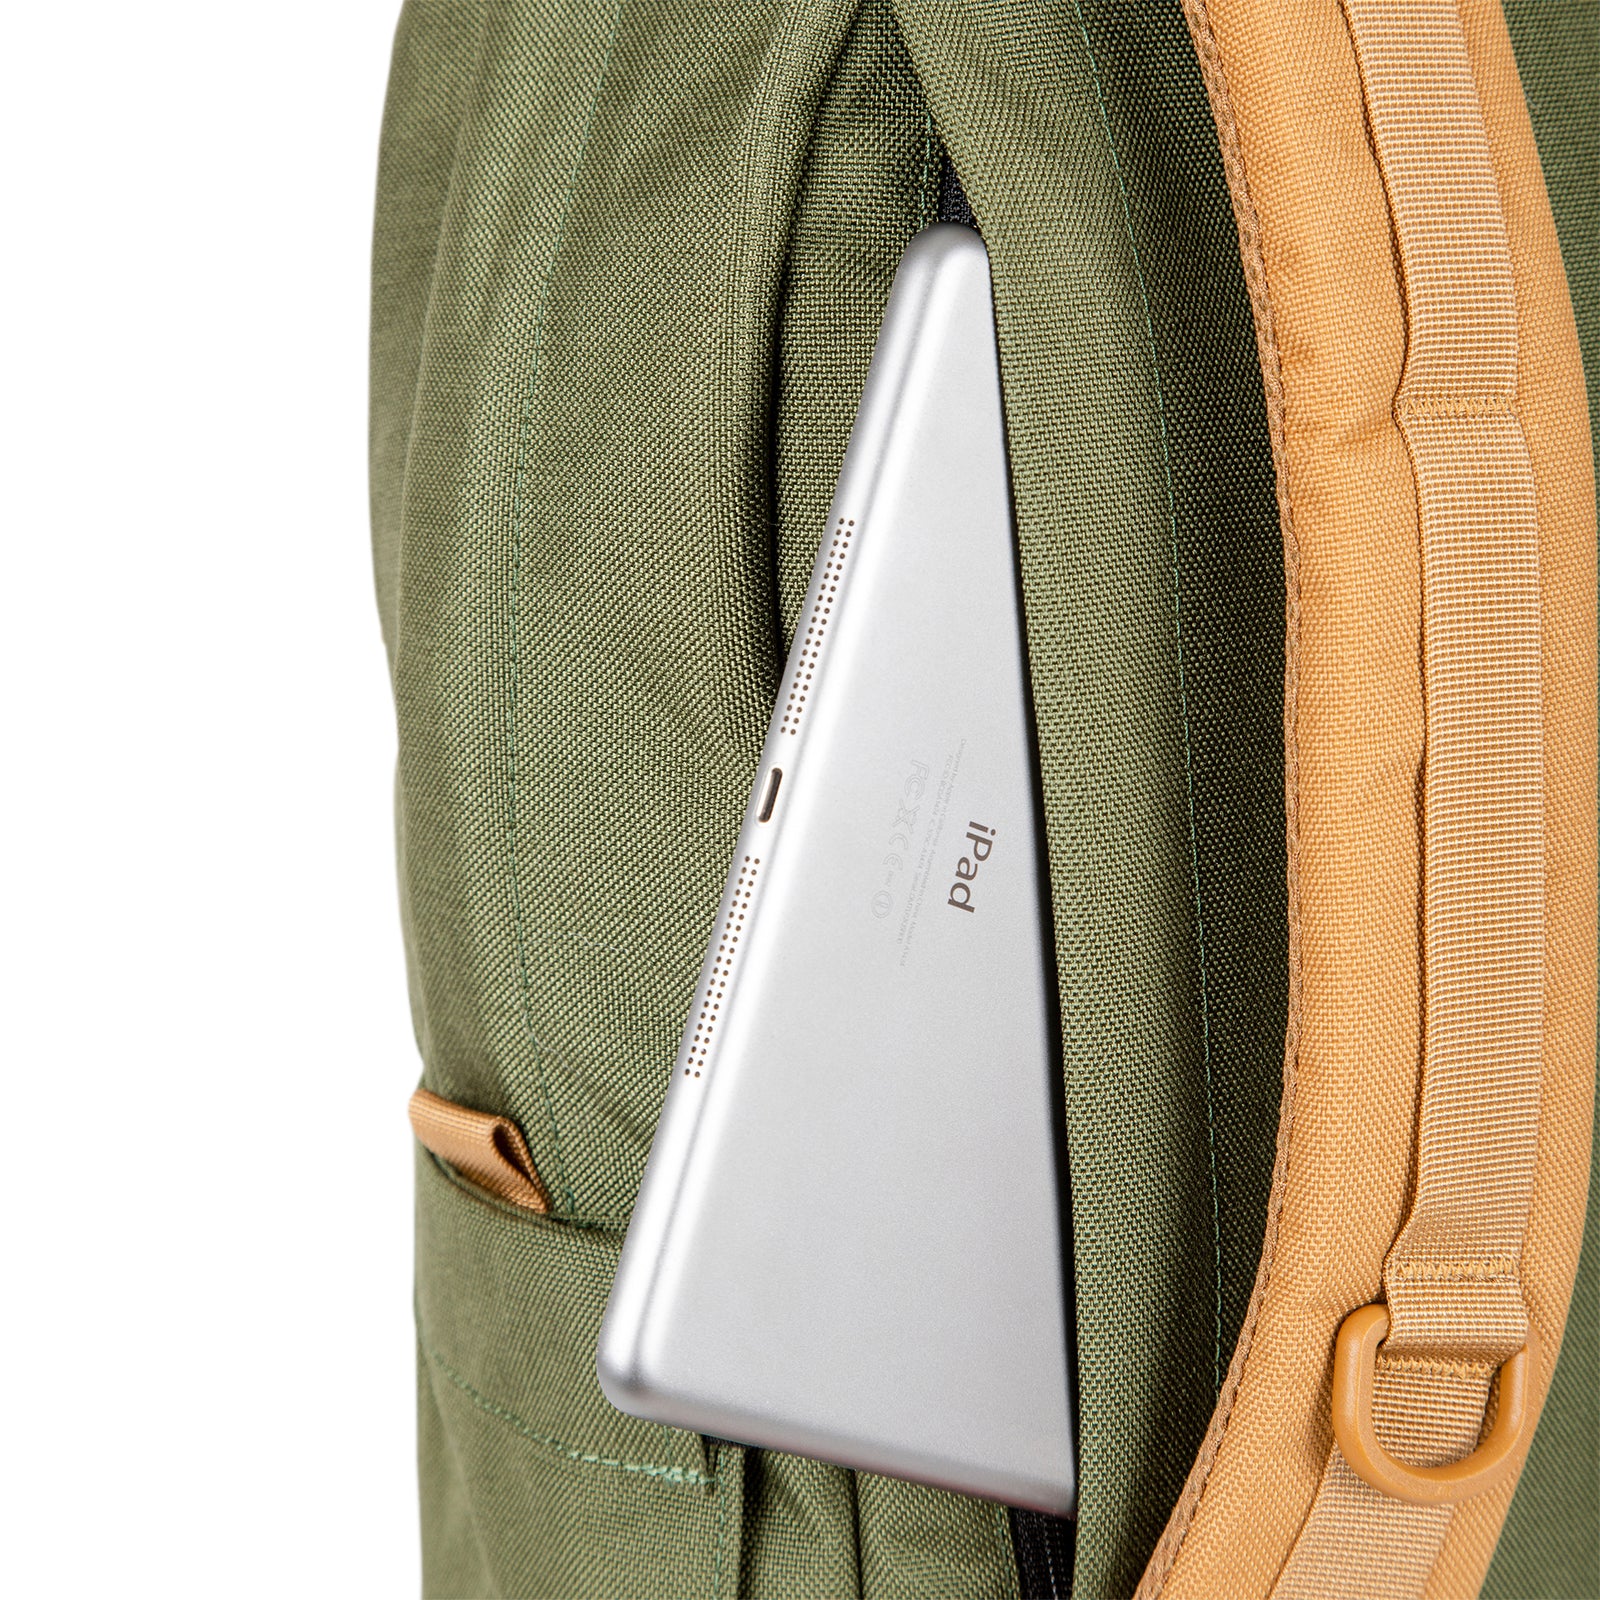 General shot of external laptop sleeve access on back of Topo Designs Daypack Classic 100% recycled nylon backpack for work or school in olive green.